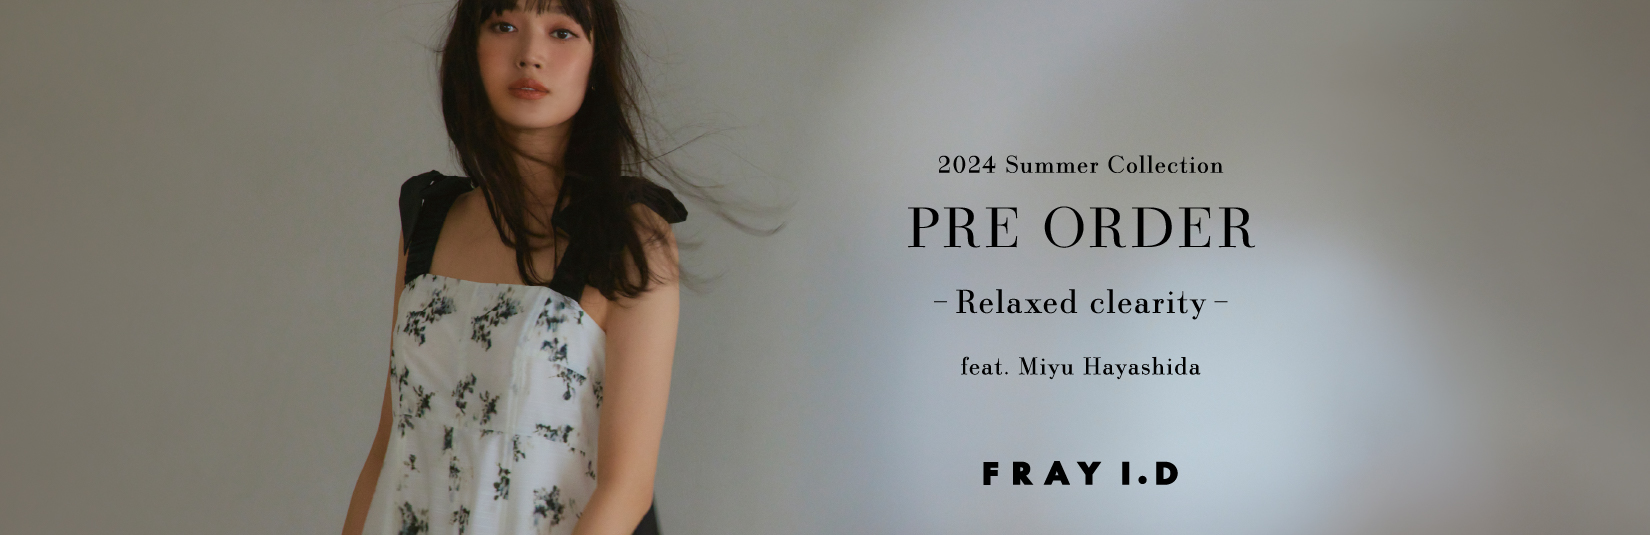 2024 Summer Collection PRE ORDER -Relaxed clearity- feat. Miyu Hayashida